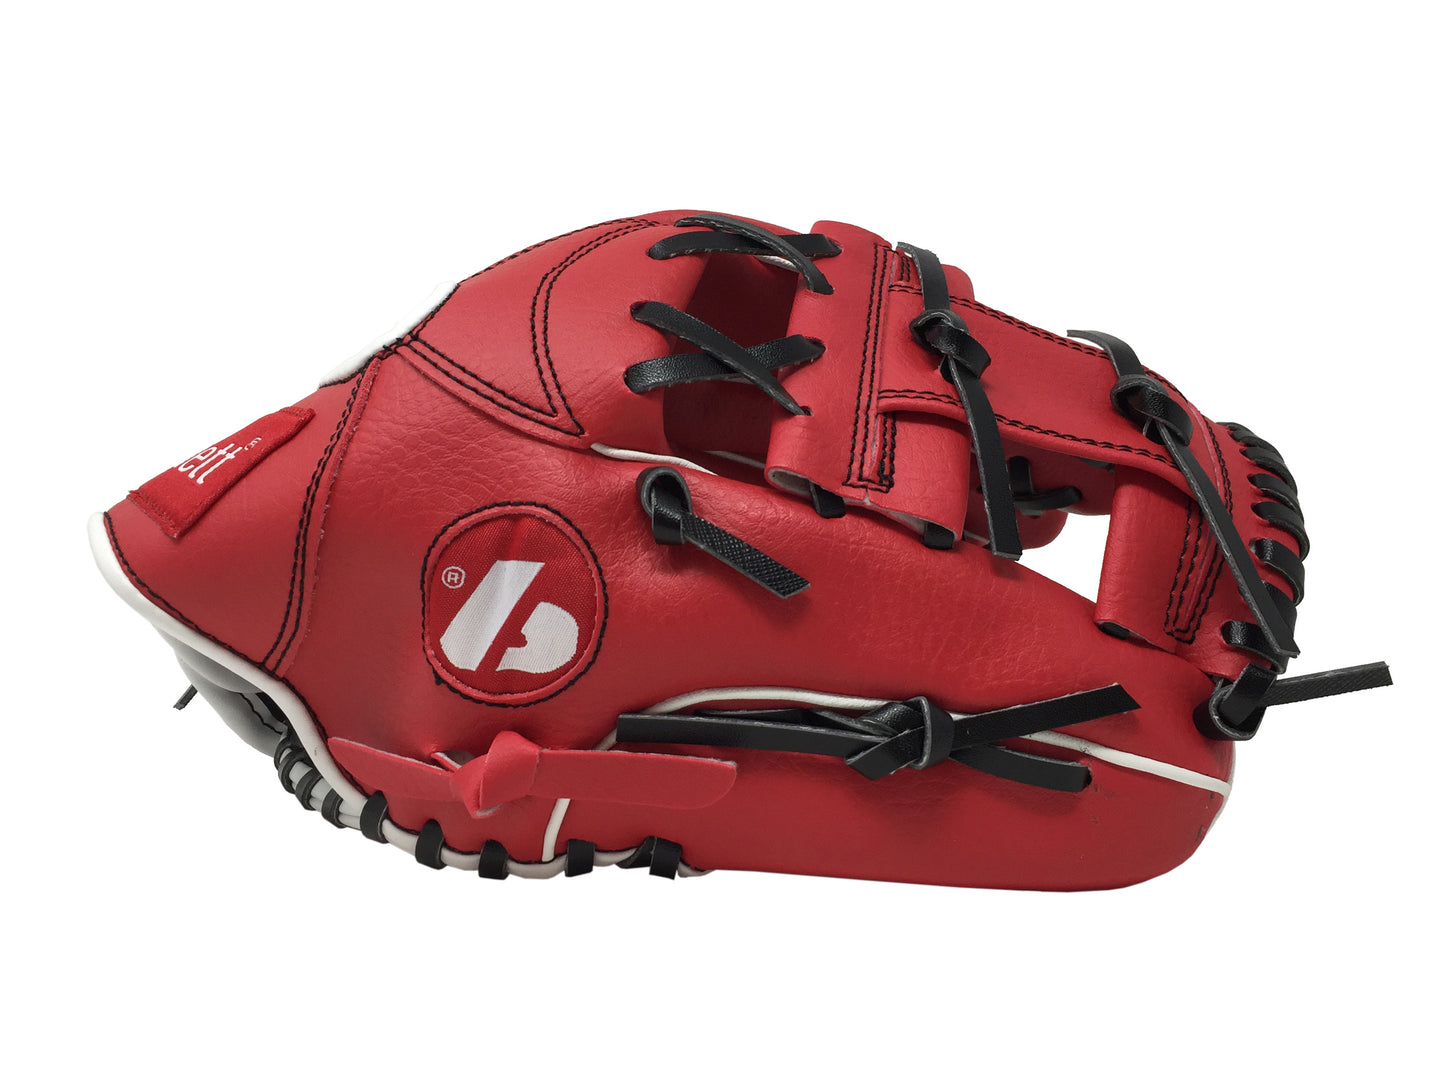 JL-115-baseball glove, outfiled, polyurethane, size 11.5" red